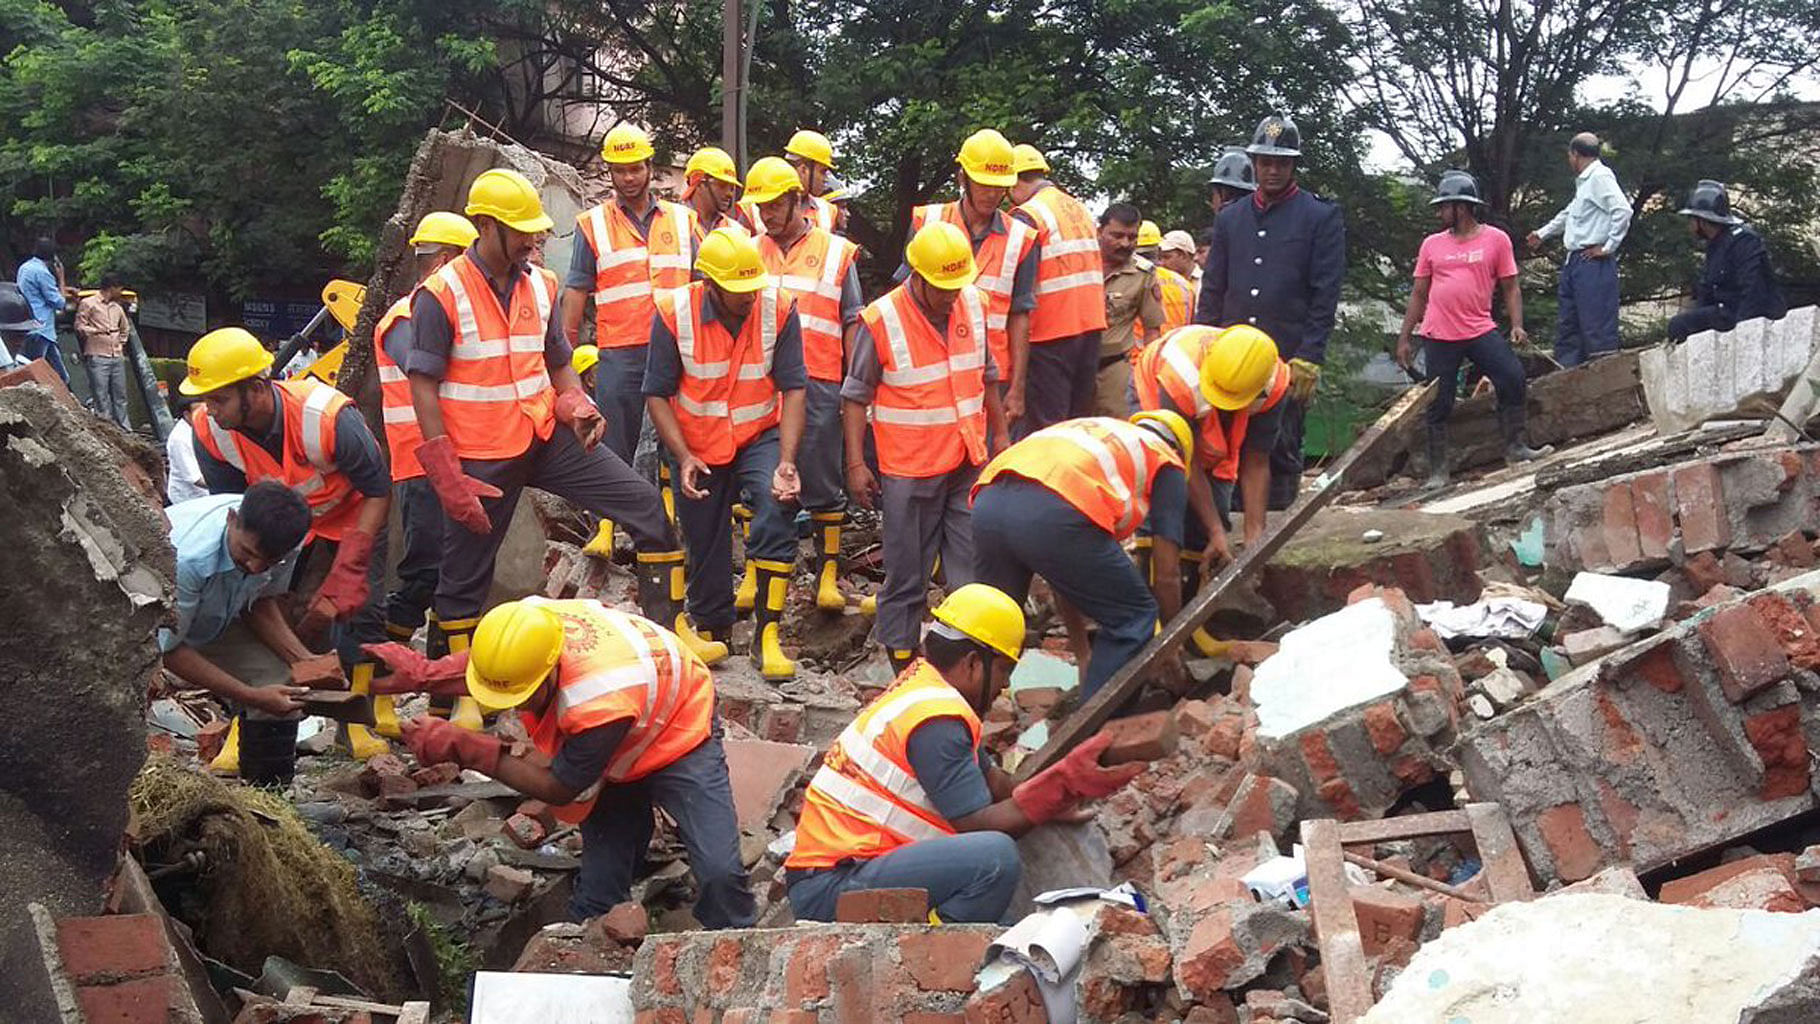 NDRF personnel during rescue operation at the building collapse site in Bhiwandi, Maharashtra on Monday, 8 August 2016. (Photo Courtesy: Twitter/<a href="https://twitter.com/NDRFHQ/status/762490781949046784">@NDRFHQ</a>)